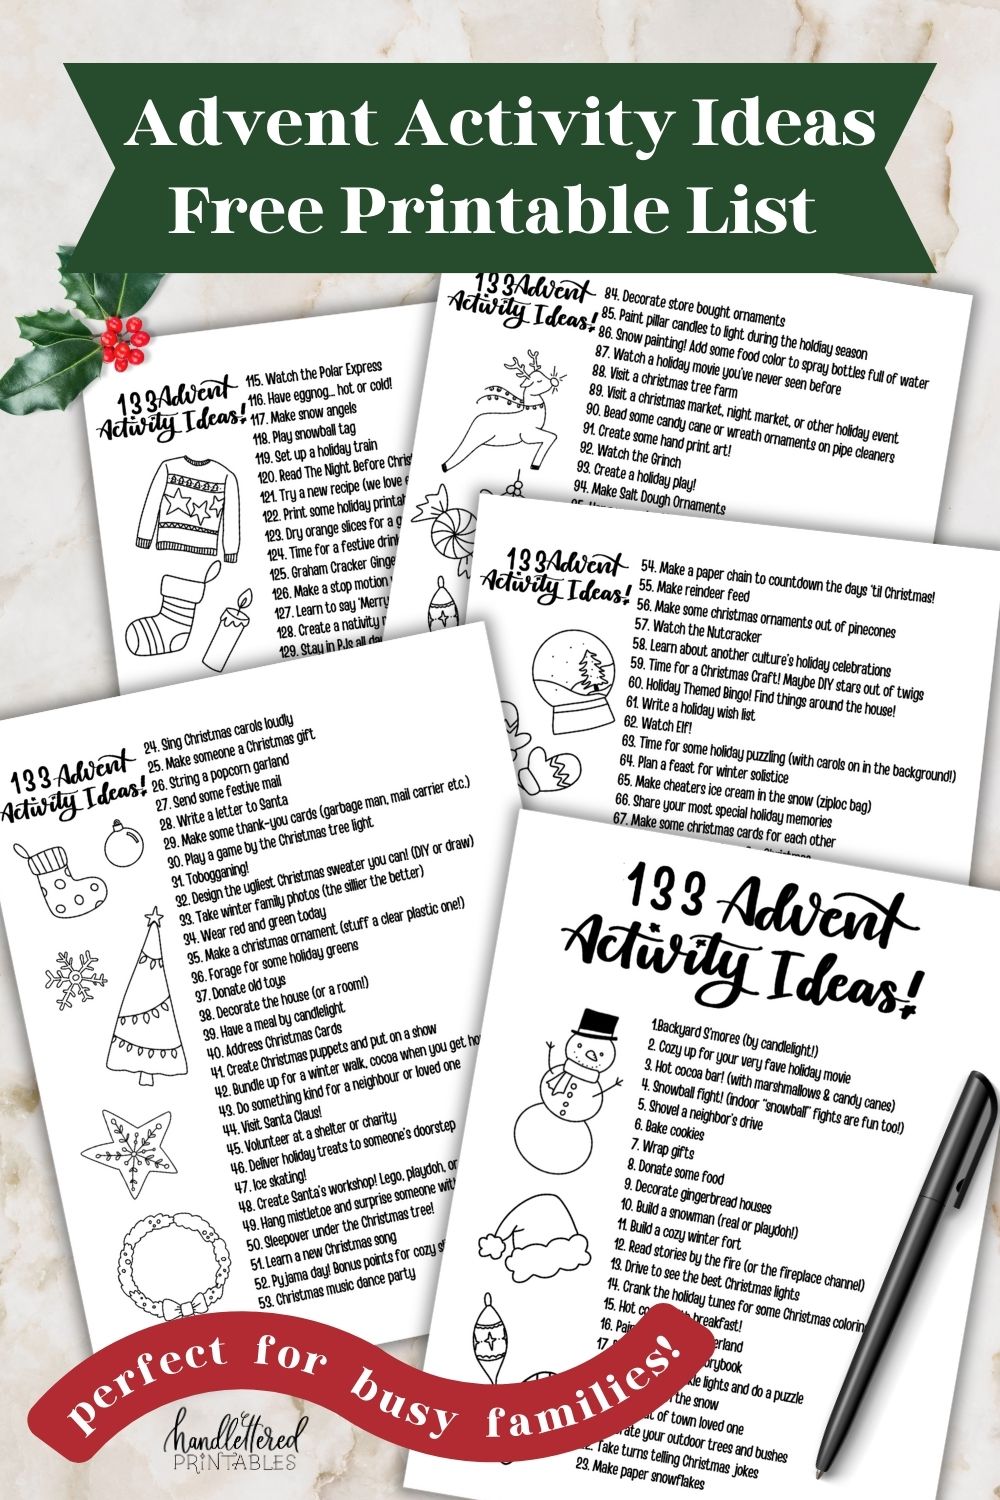 Advent activity ideas free printable list, image of the printables on countertop with pen